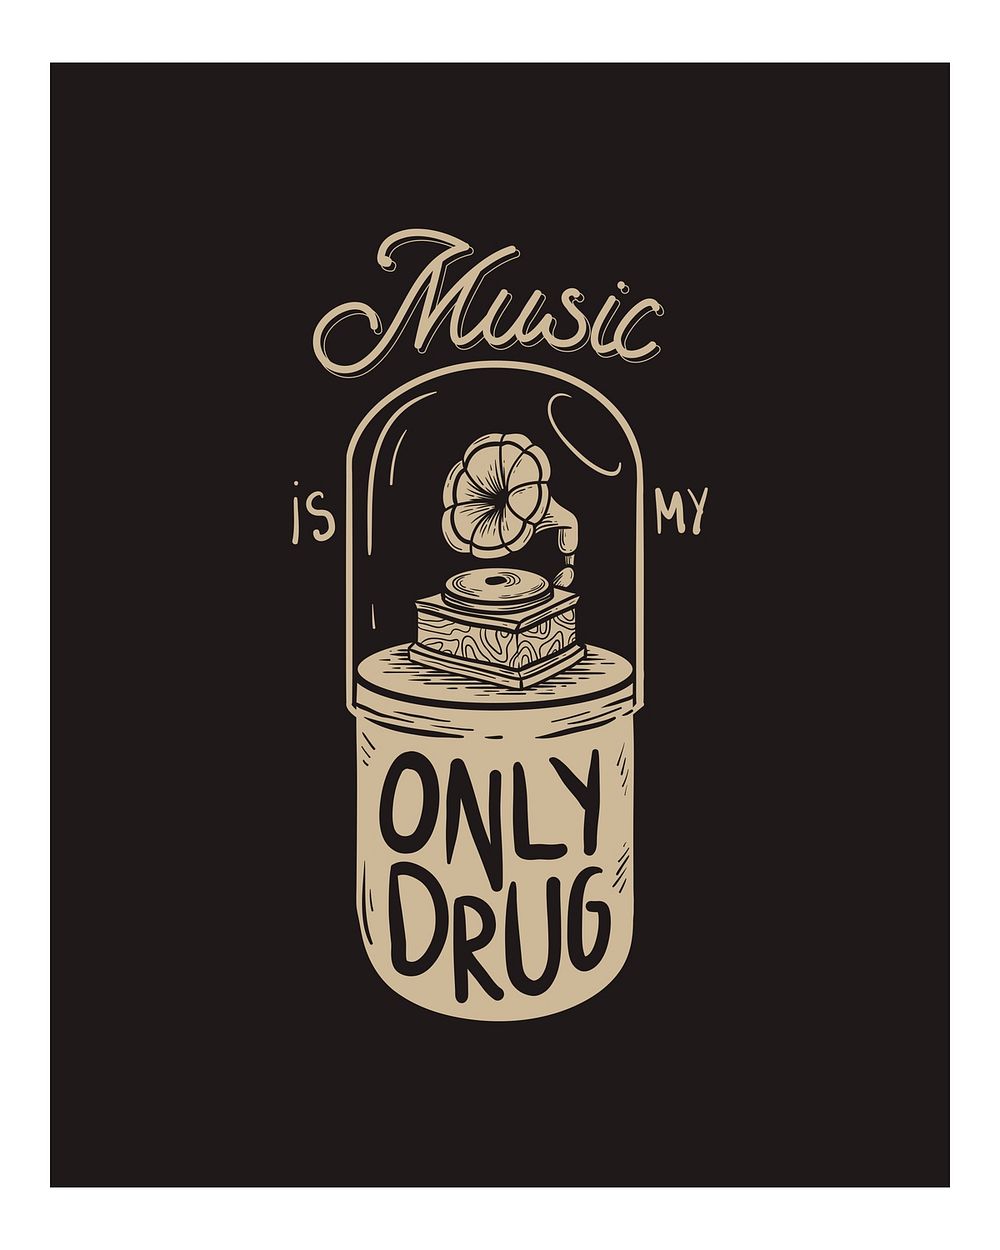 Music is my only drug illustration wall art print and poster.